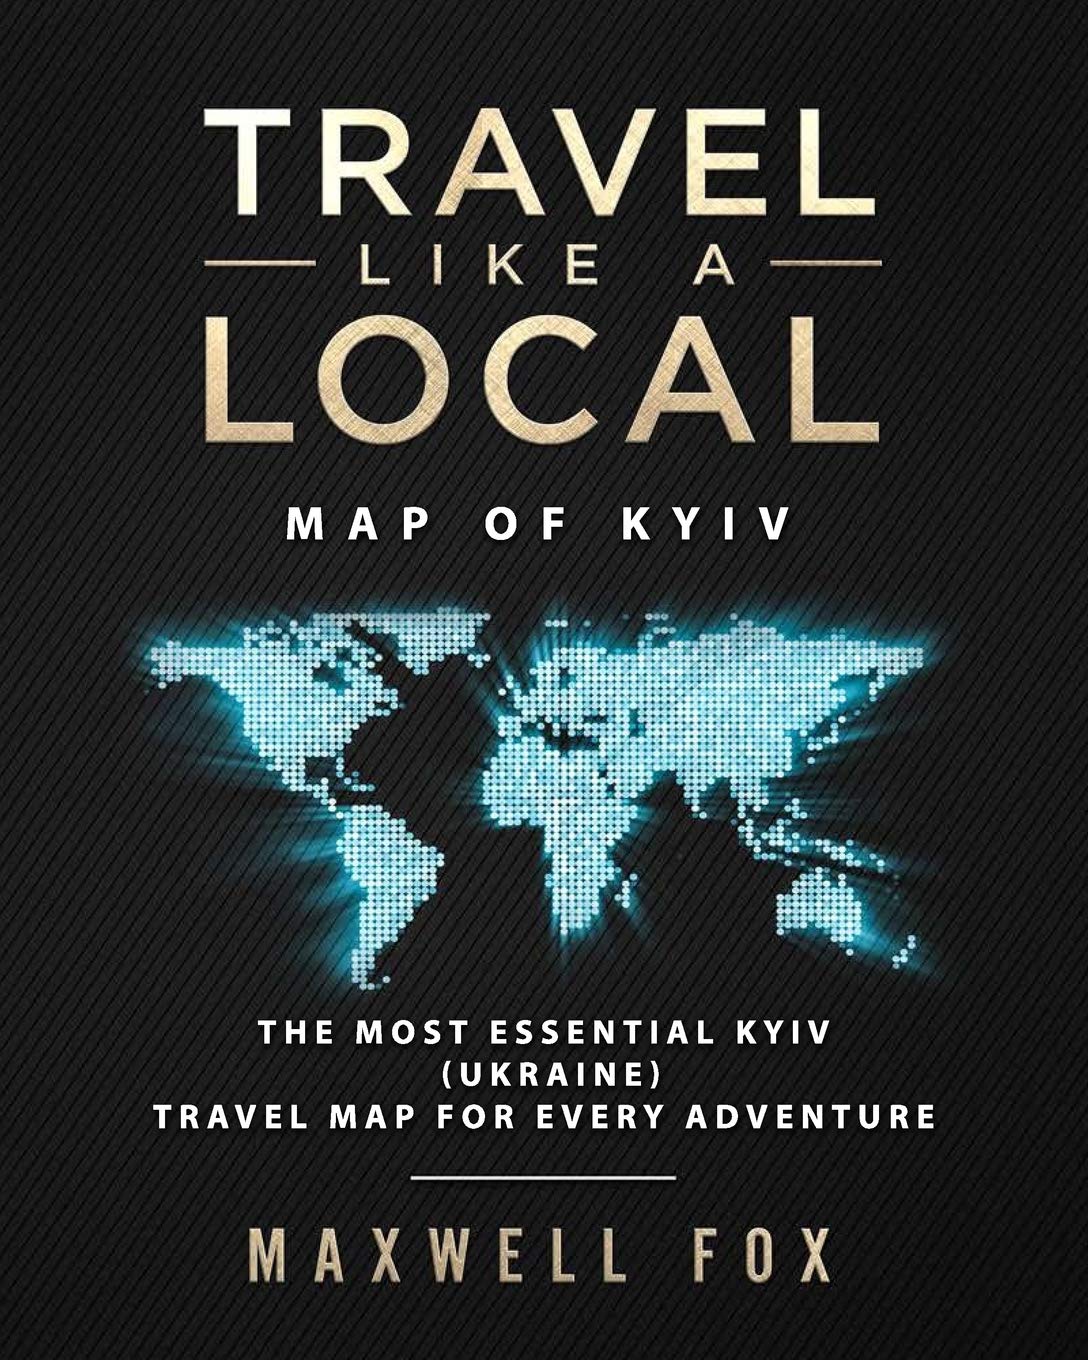 Travel Like a Local - Map of Kyiv: The Most Essential Kyiv (Ukraine) Travel Map for Every Adventure